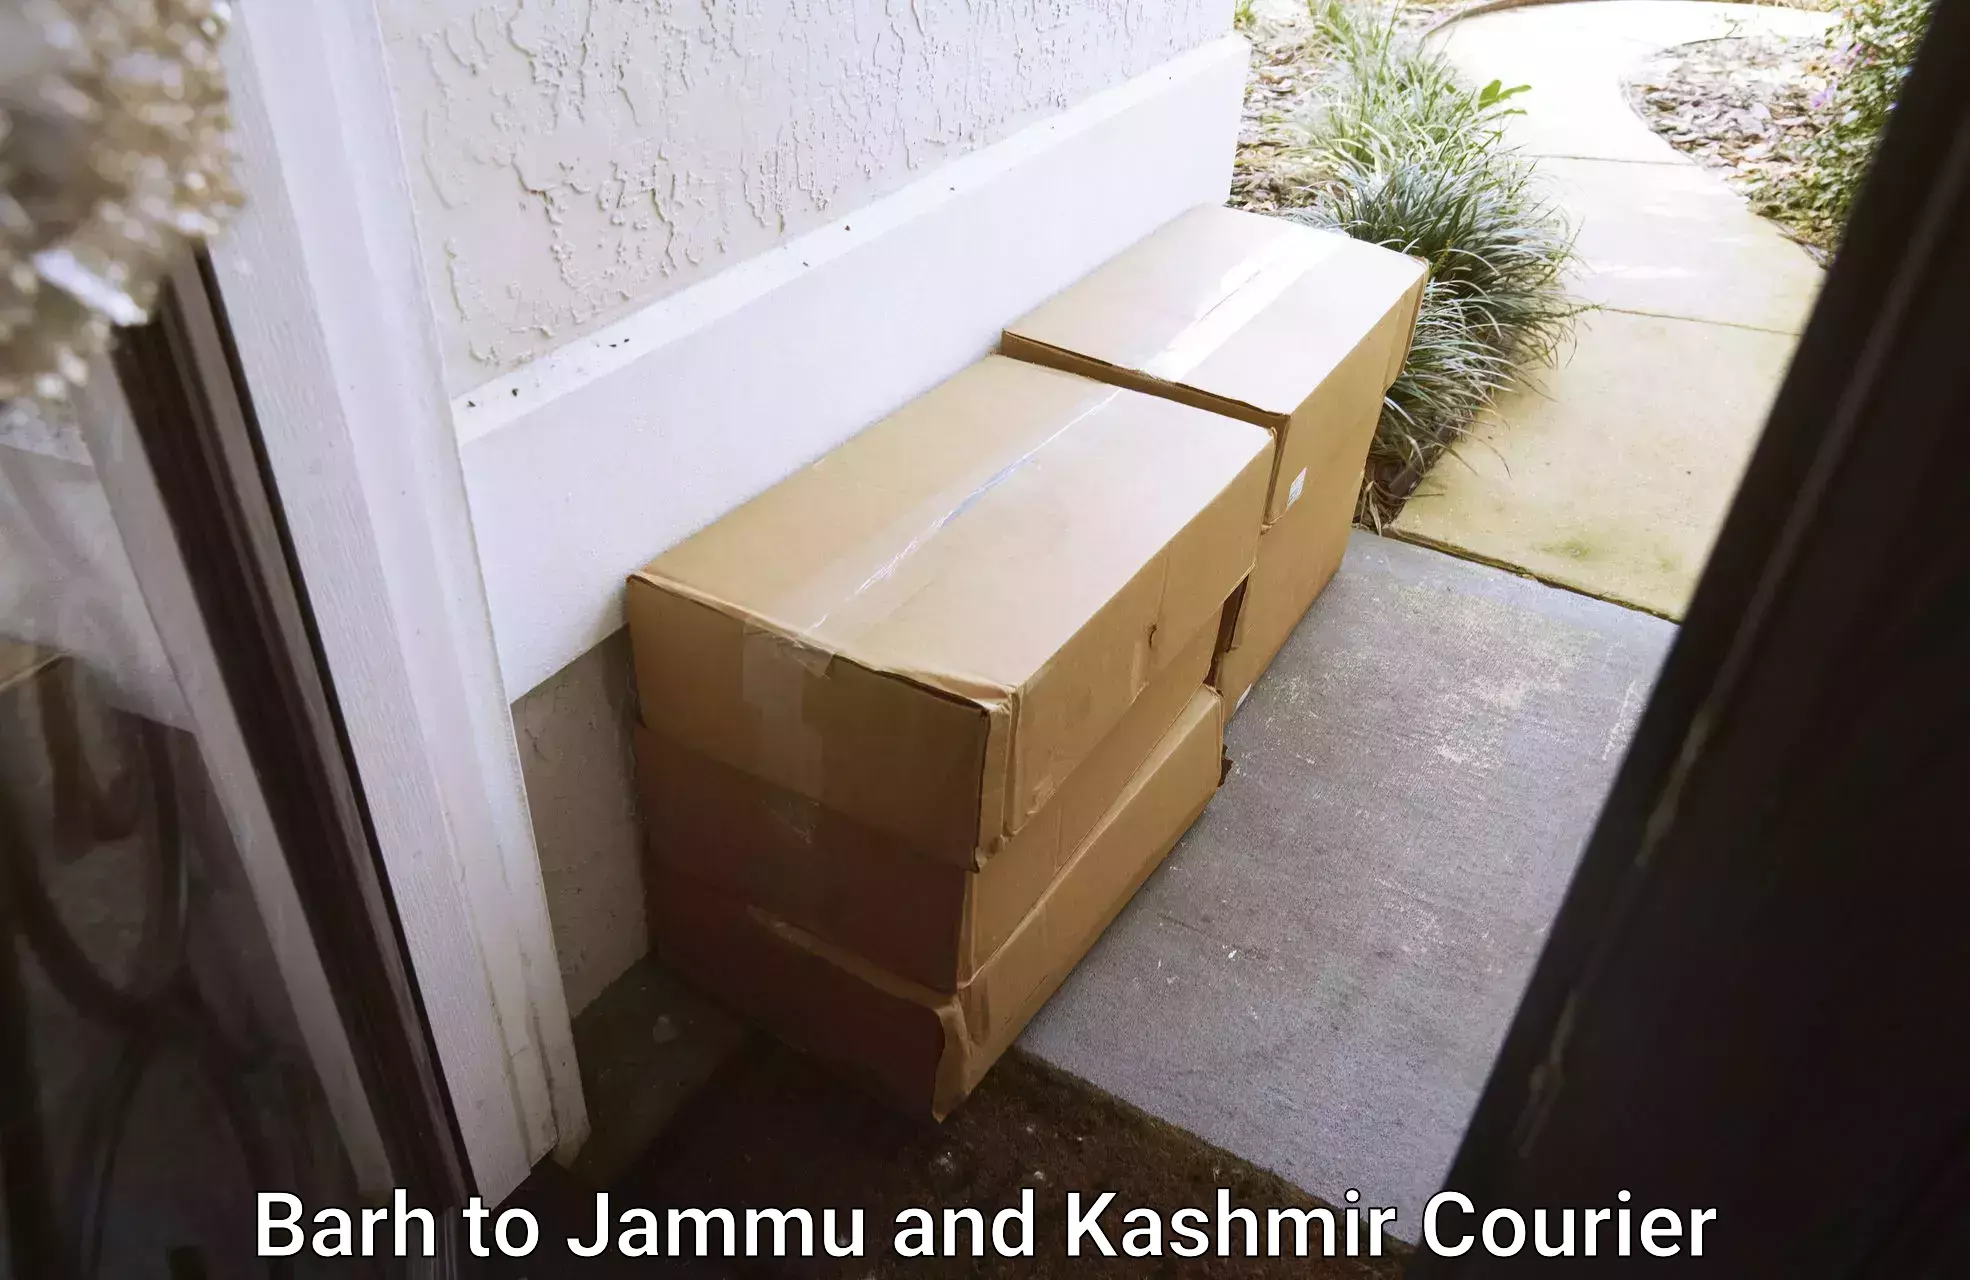 Budget-friendly movers Barh to Jammu and Kashmir